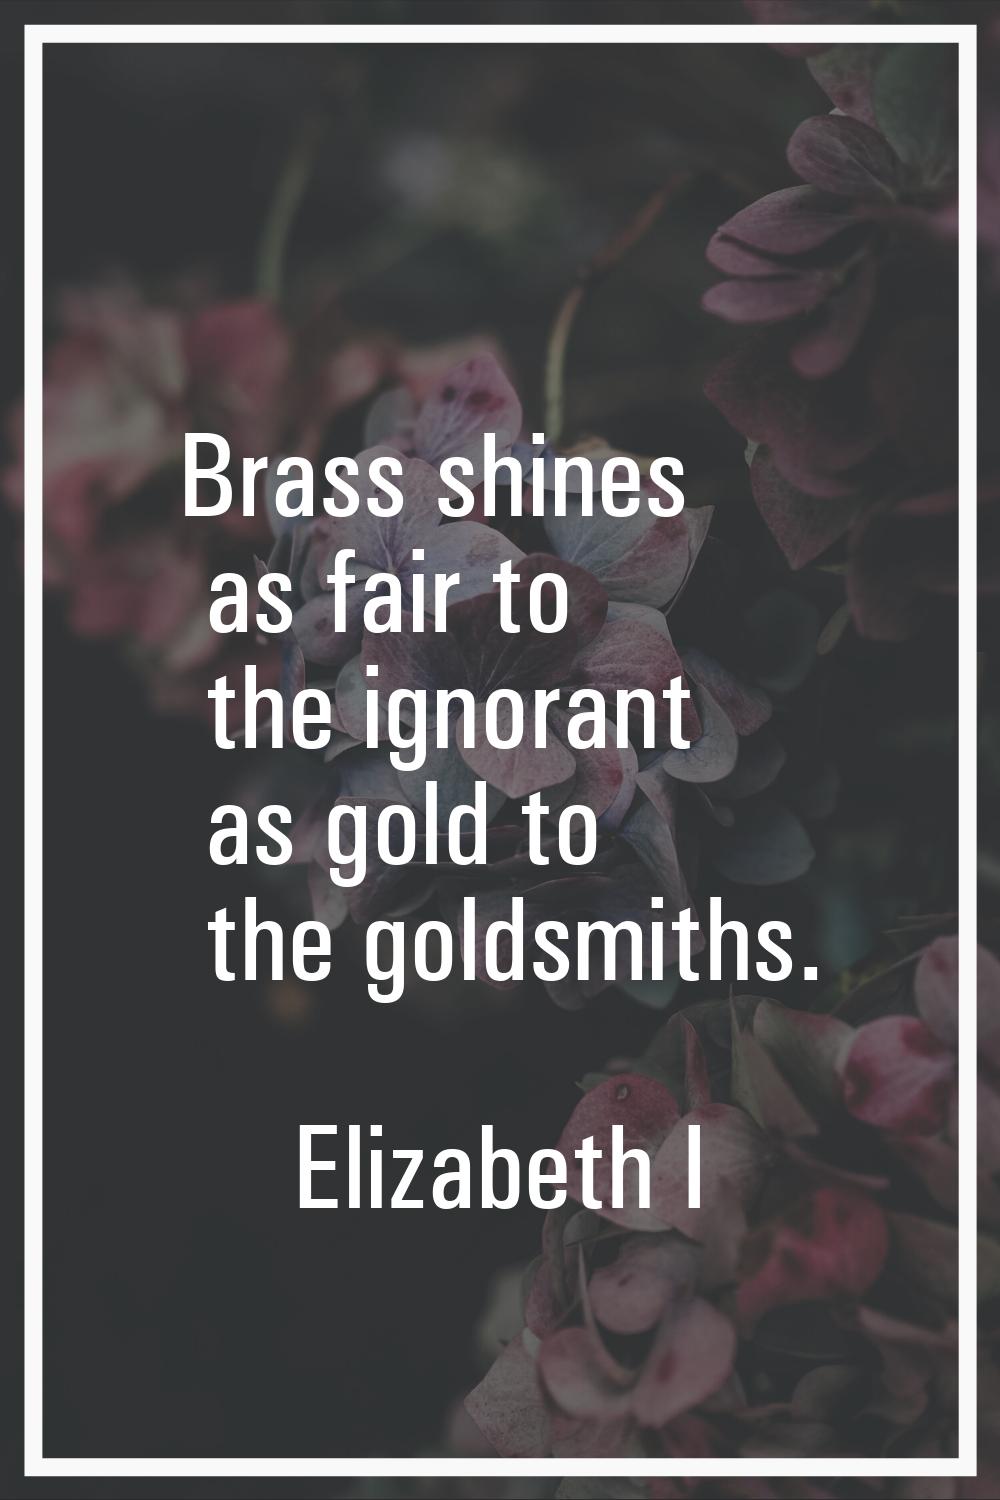 Brass shines as fair to the ignorant as gold to the goldsmiths.